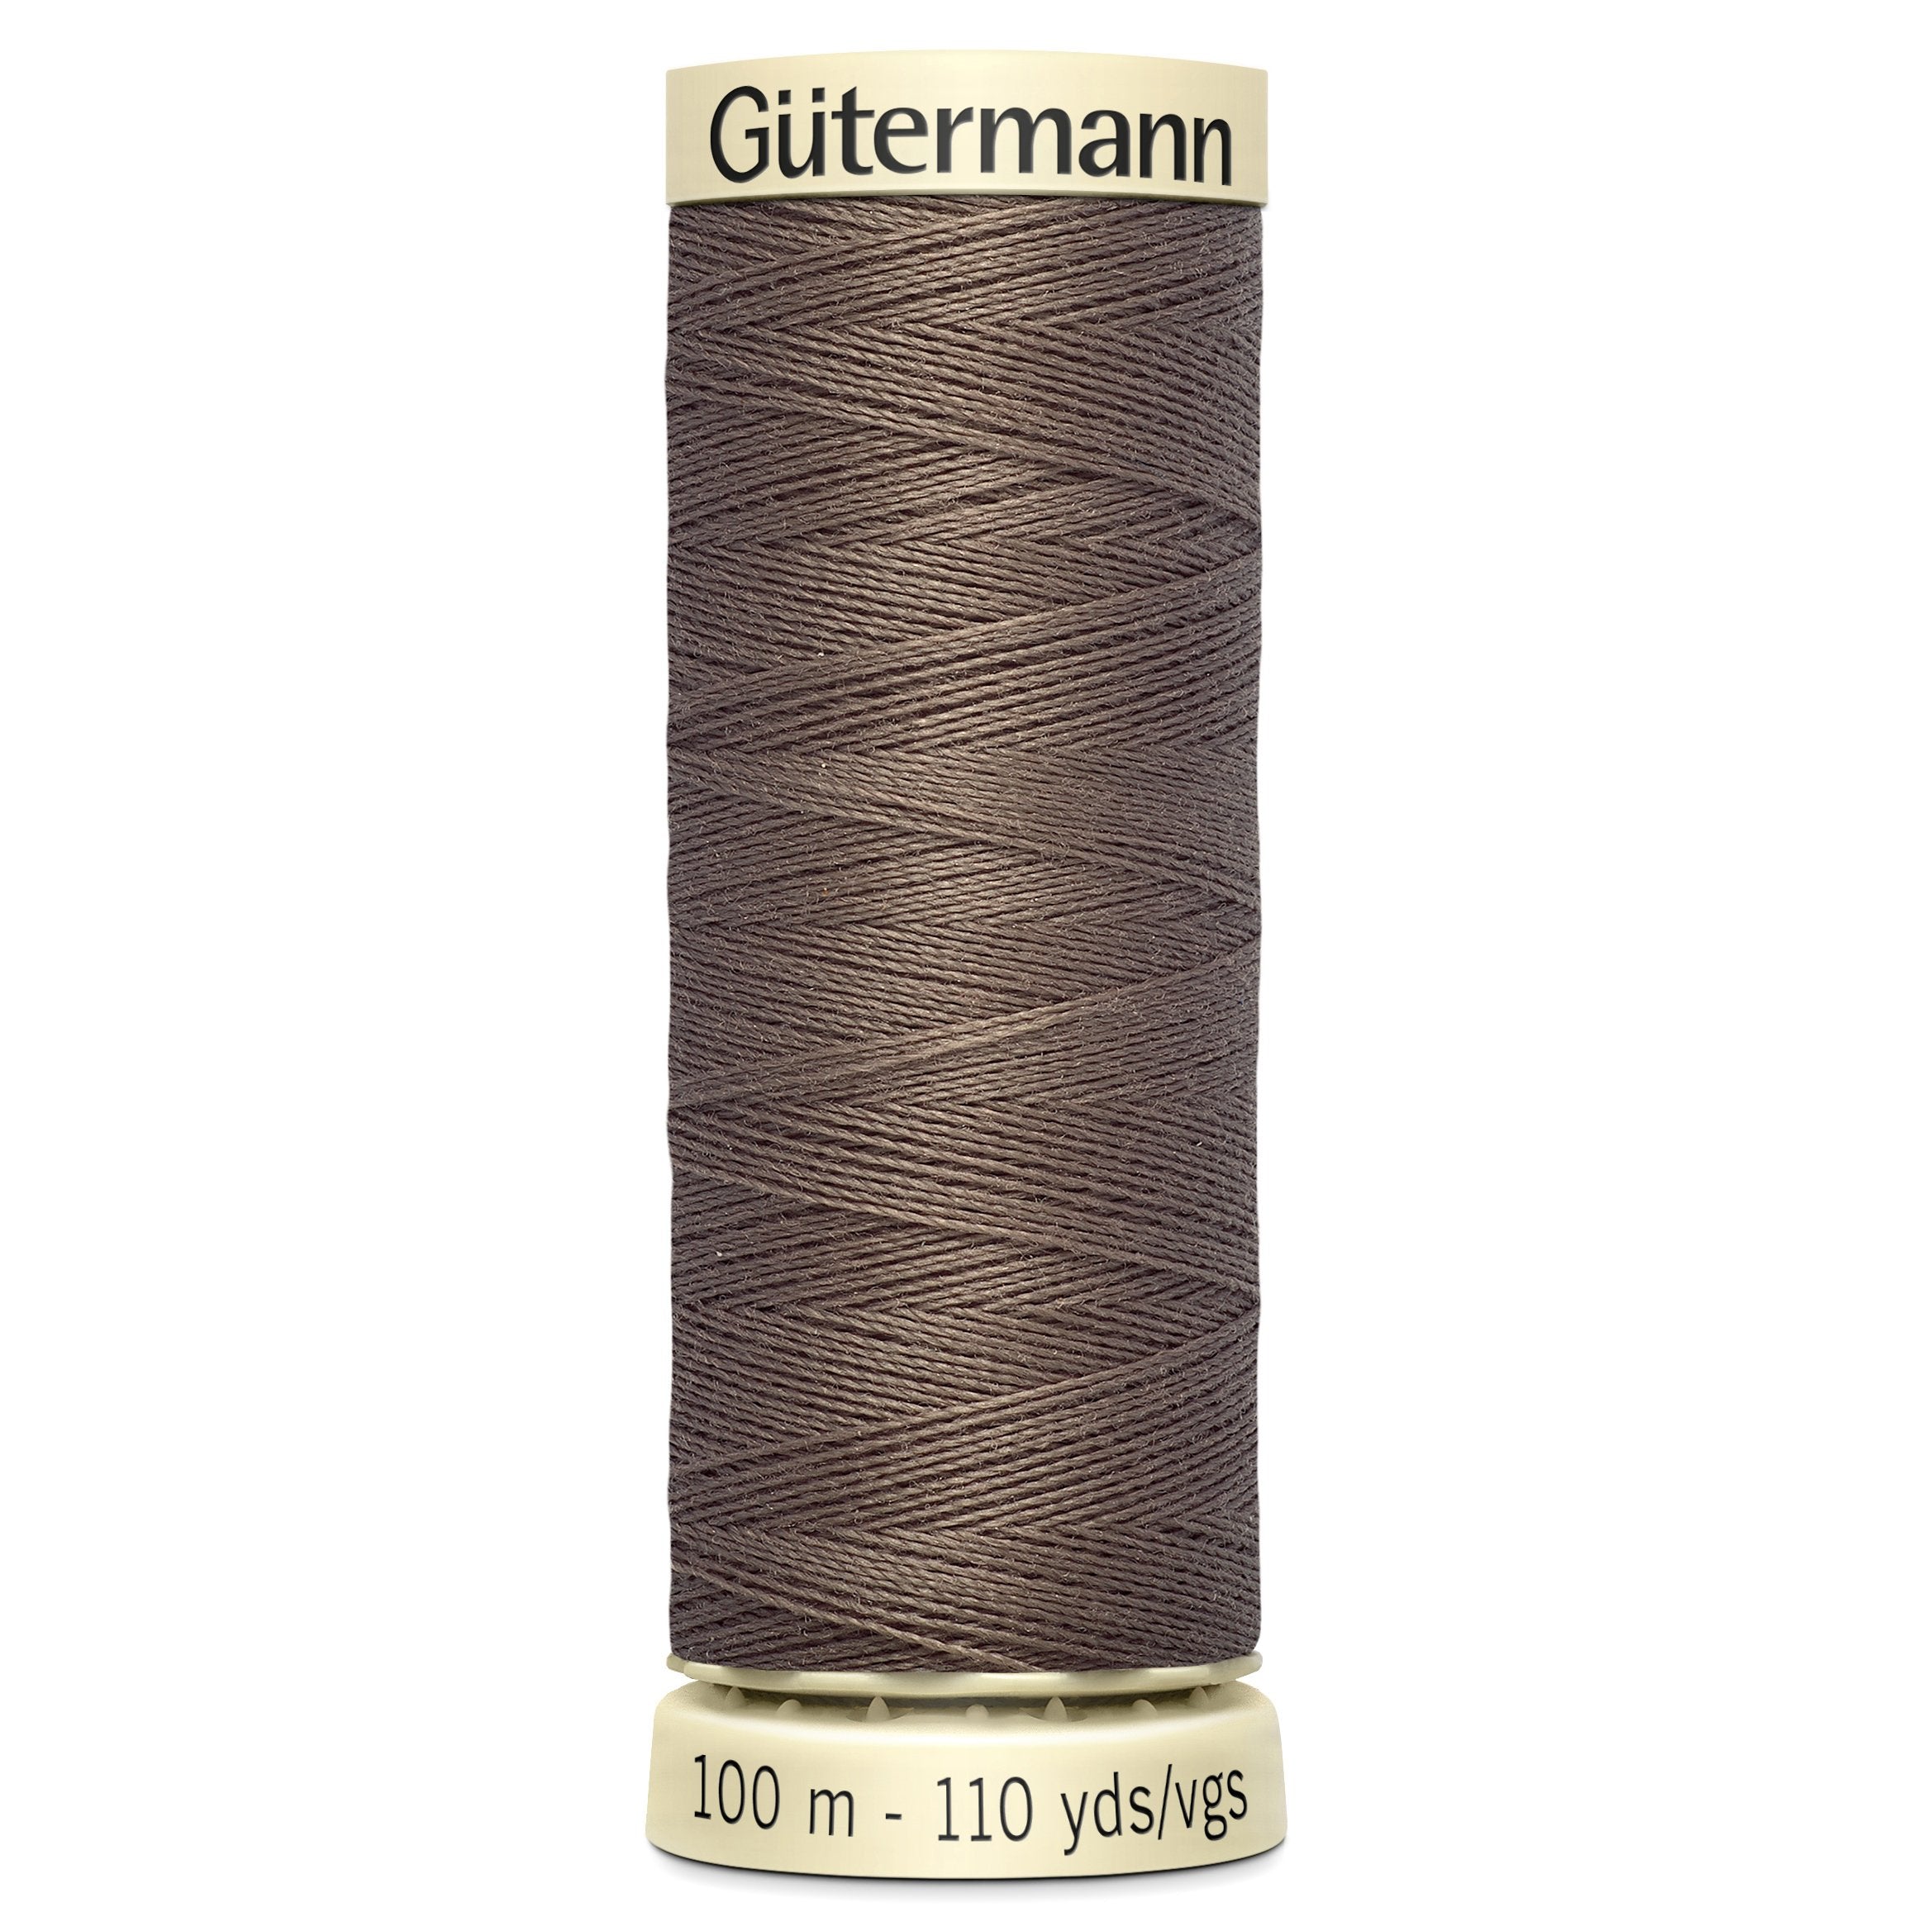 Gutermann Sew All Thread colour 439 Sienna from Jaycotts Sewing Supplies